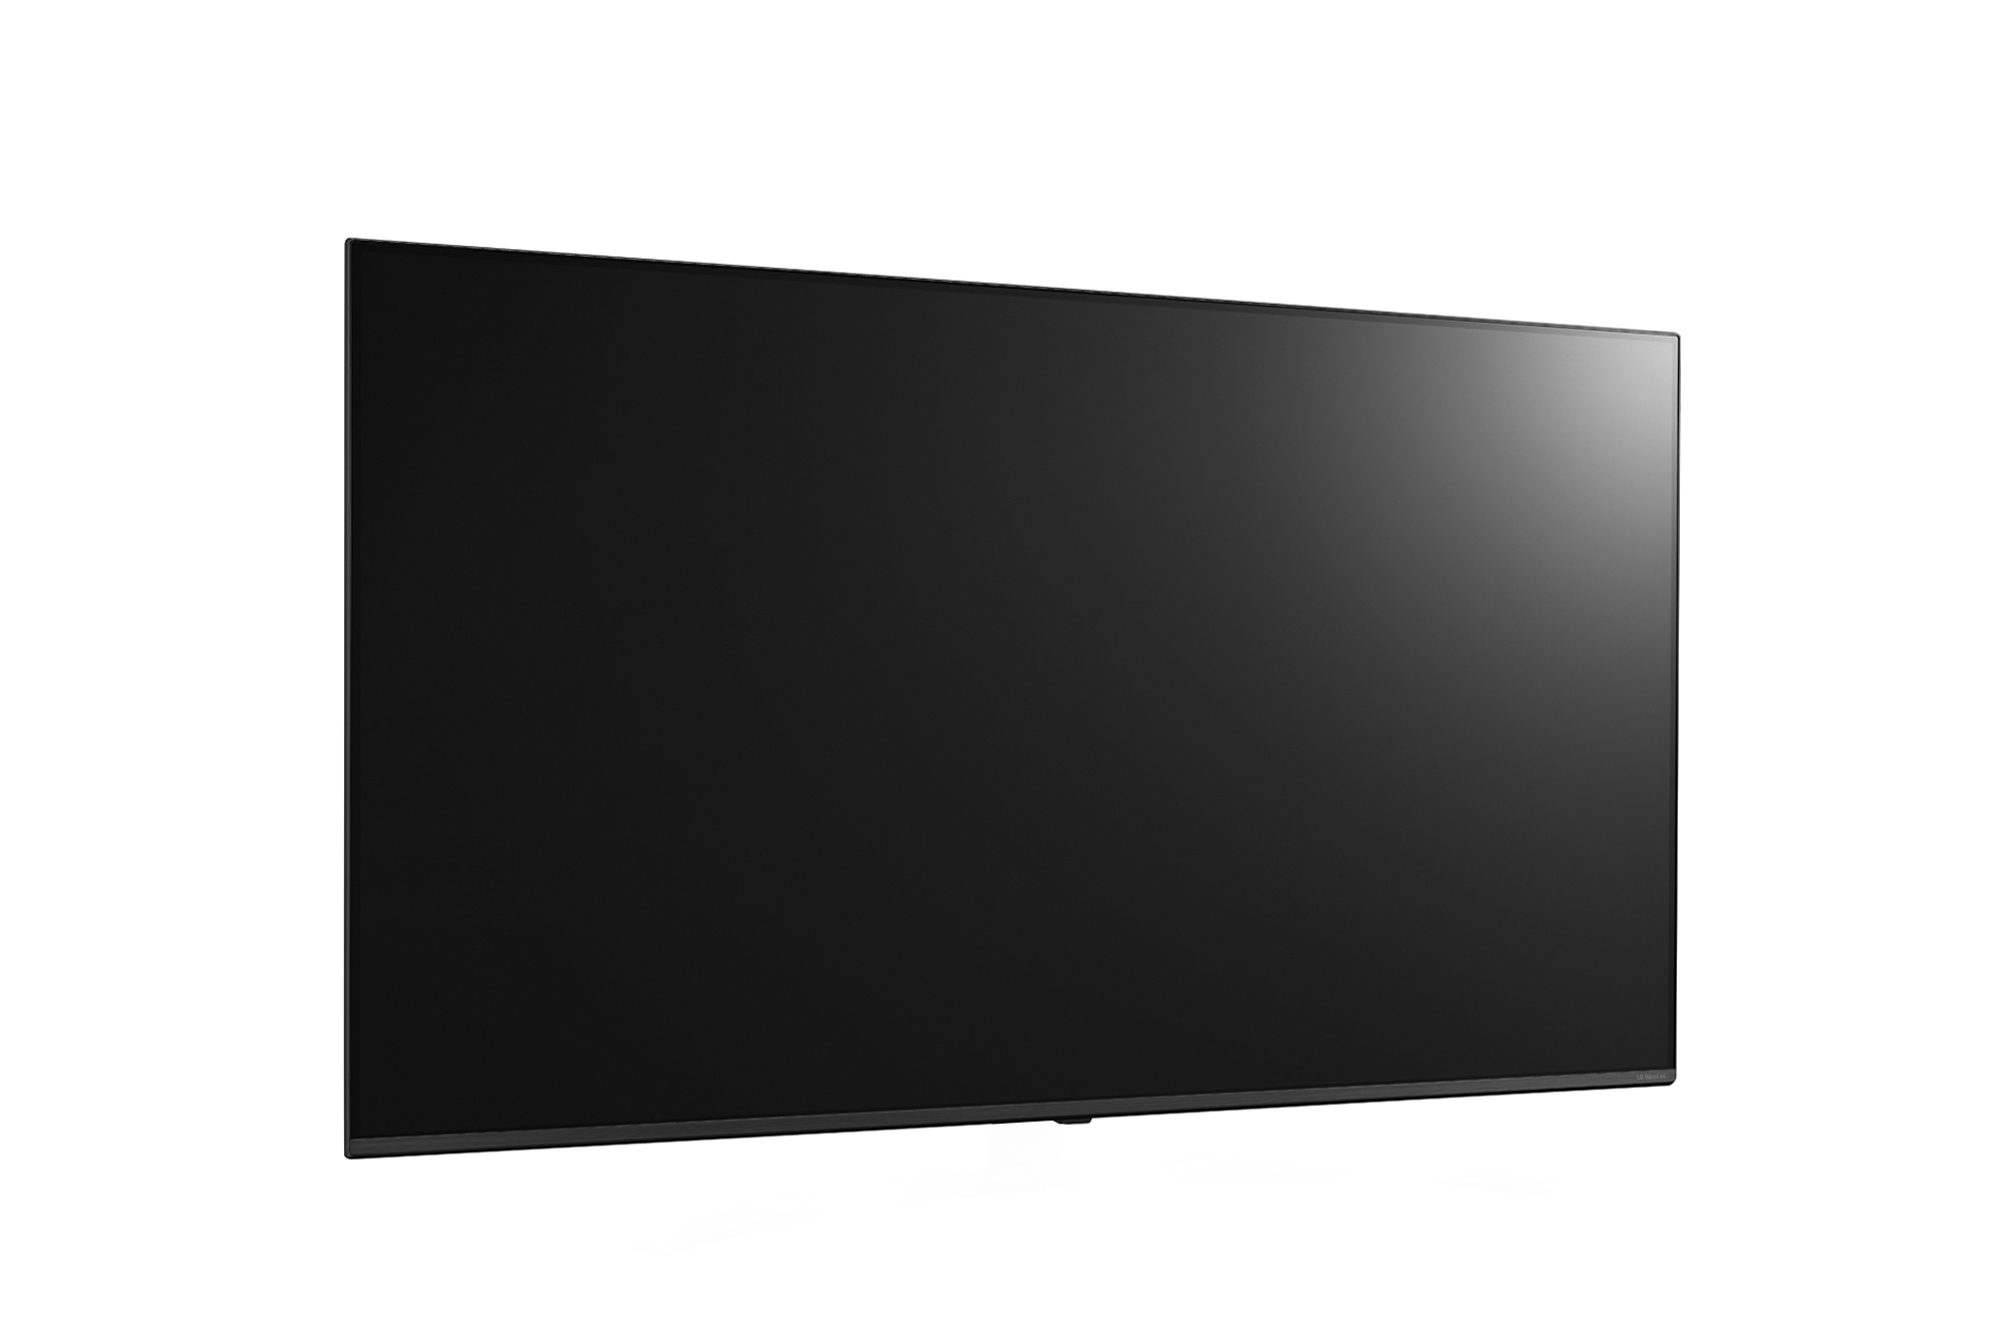 Commercial TV 65UR762H (MEA), +15 degree side view